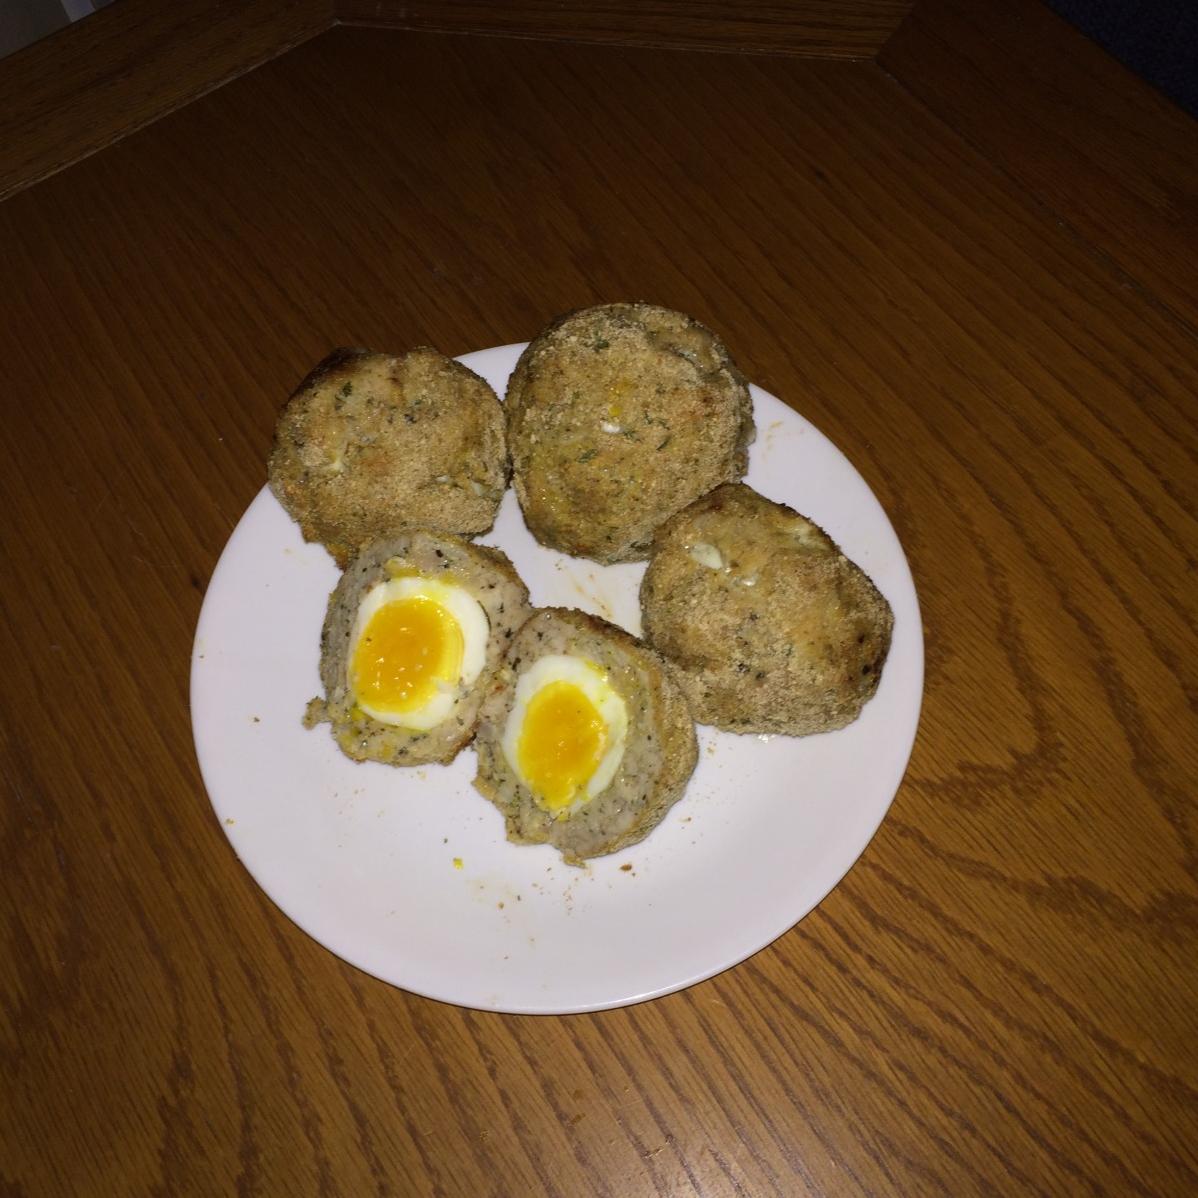  Ready for any occasion, these Scotch eggs are sure to impress your guests.